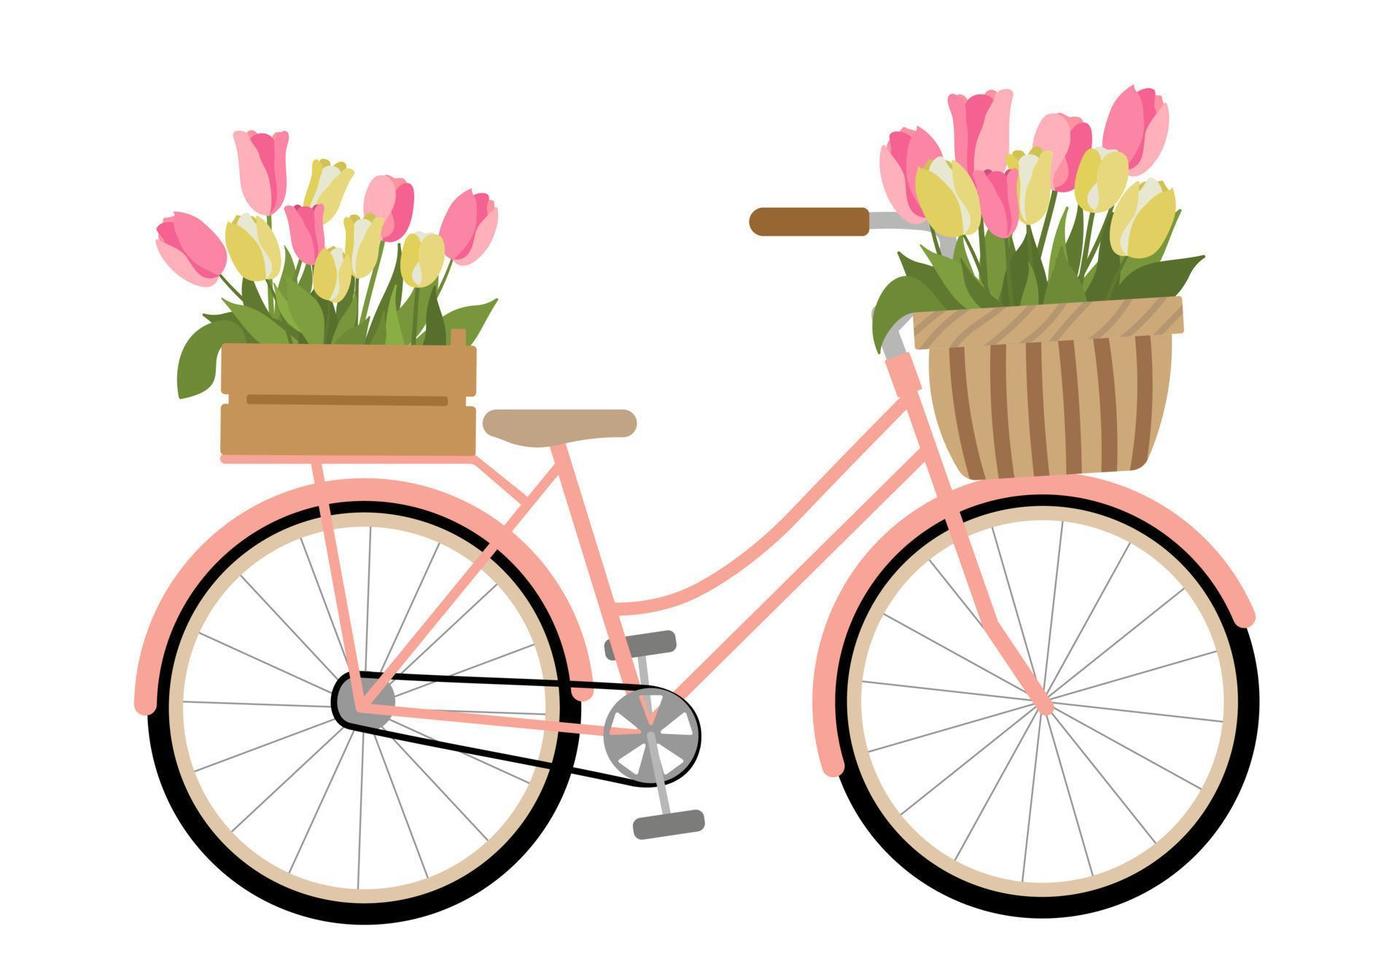 Cute hand drawn bicycle with crate and basket. Isolated on white background. Bike carrying baskets with flowers and plants. Vector flat illustration. Retro vehicle with flower bouquet.